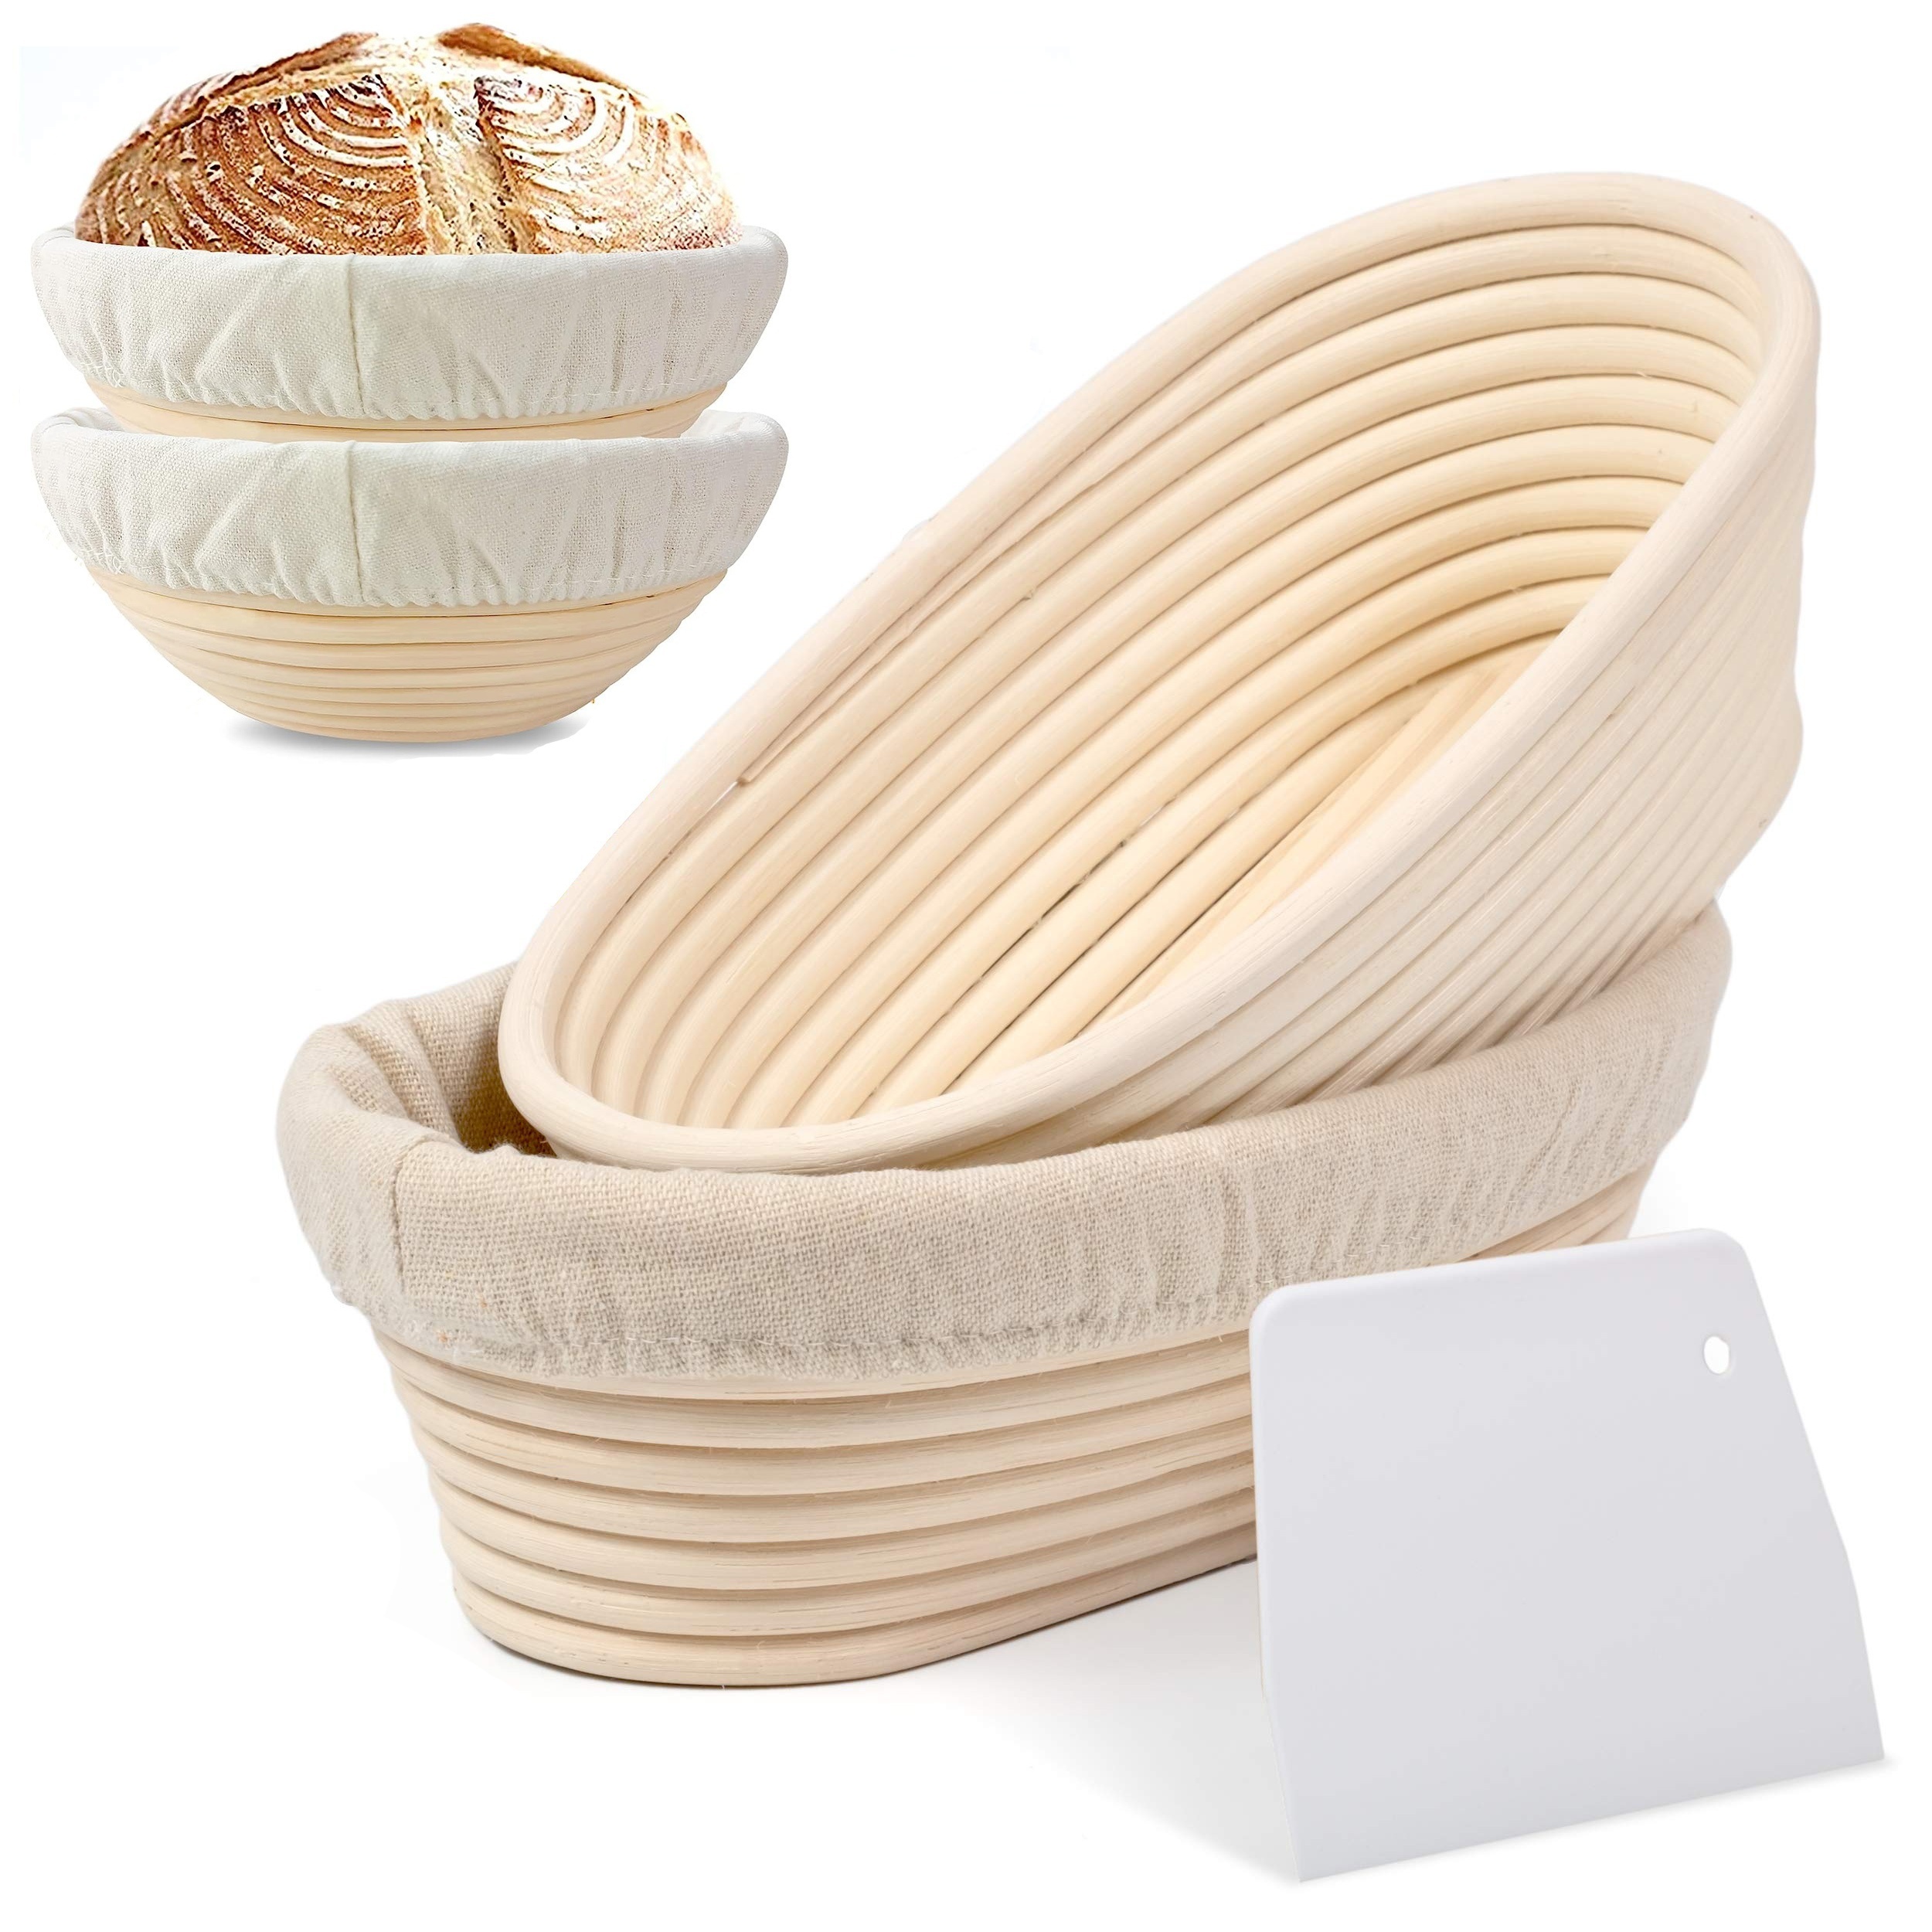 Banneton Bread Proofing Basket Set, 10 Inch Oval & 9 Inch Round Sourdough  bread baking supplies with Linen Liner, Silicone Bread Sling, Danish Dough